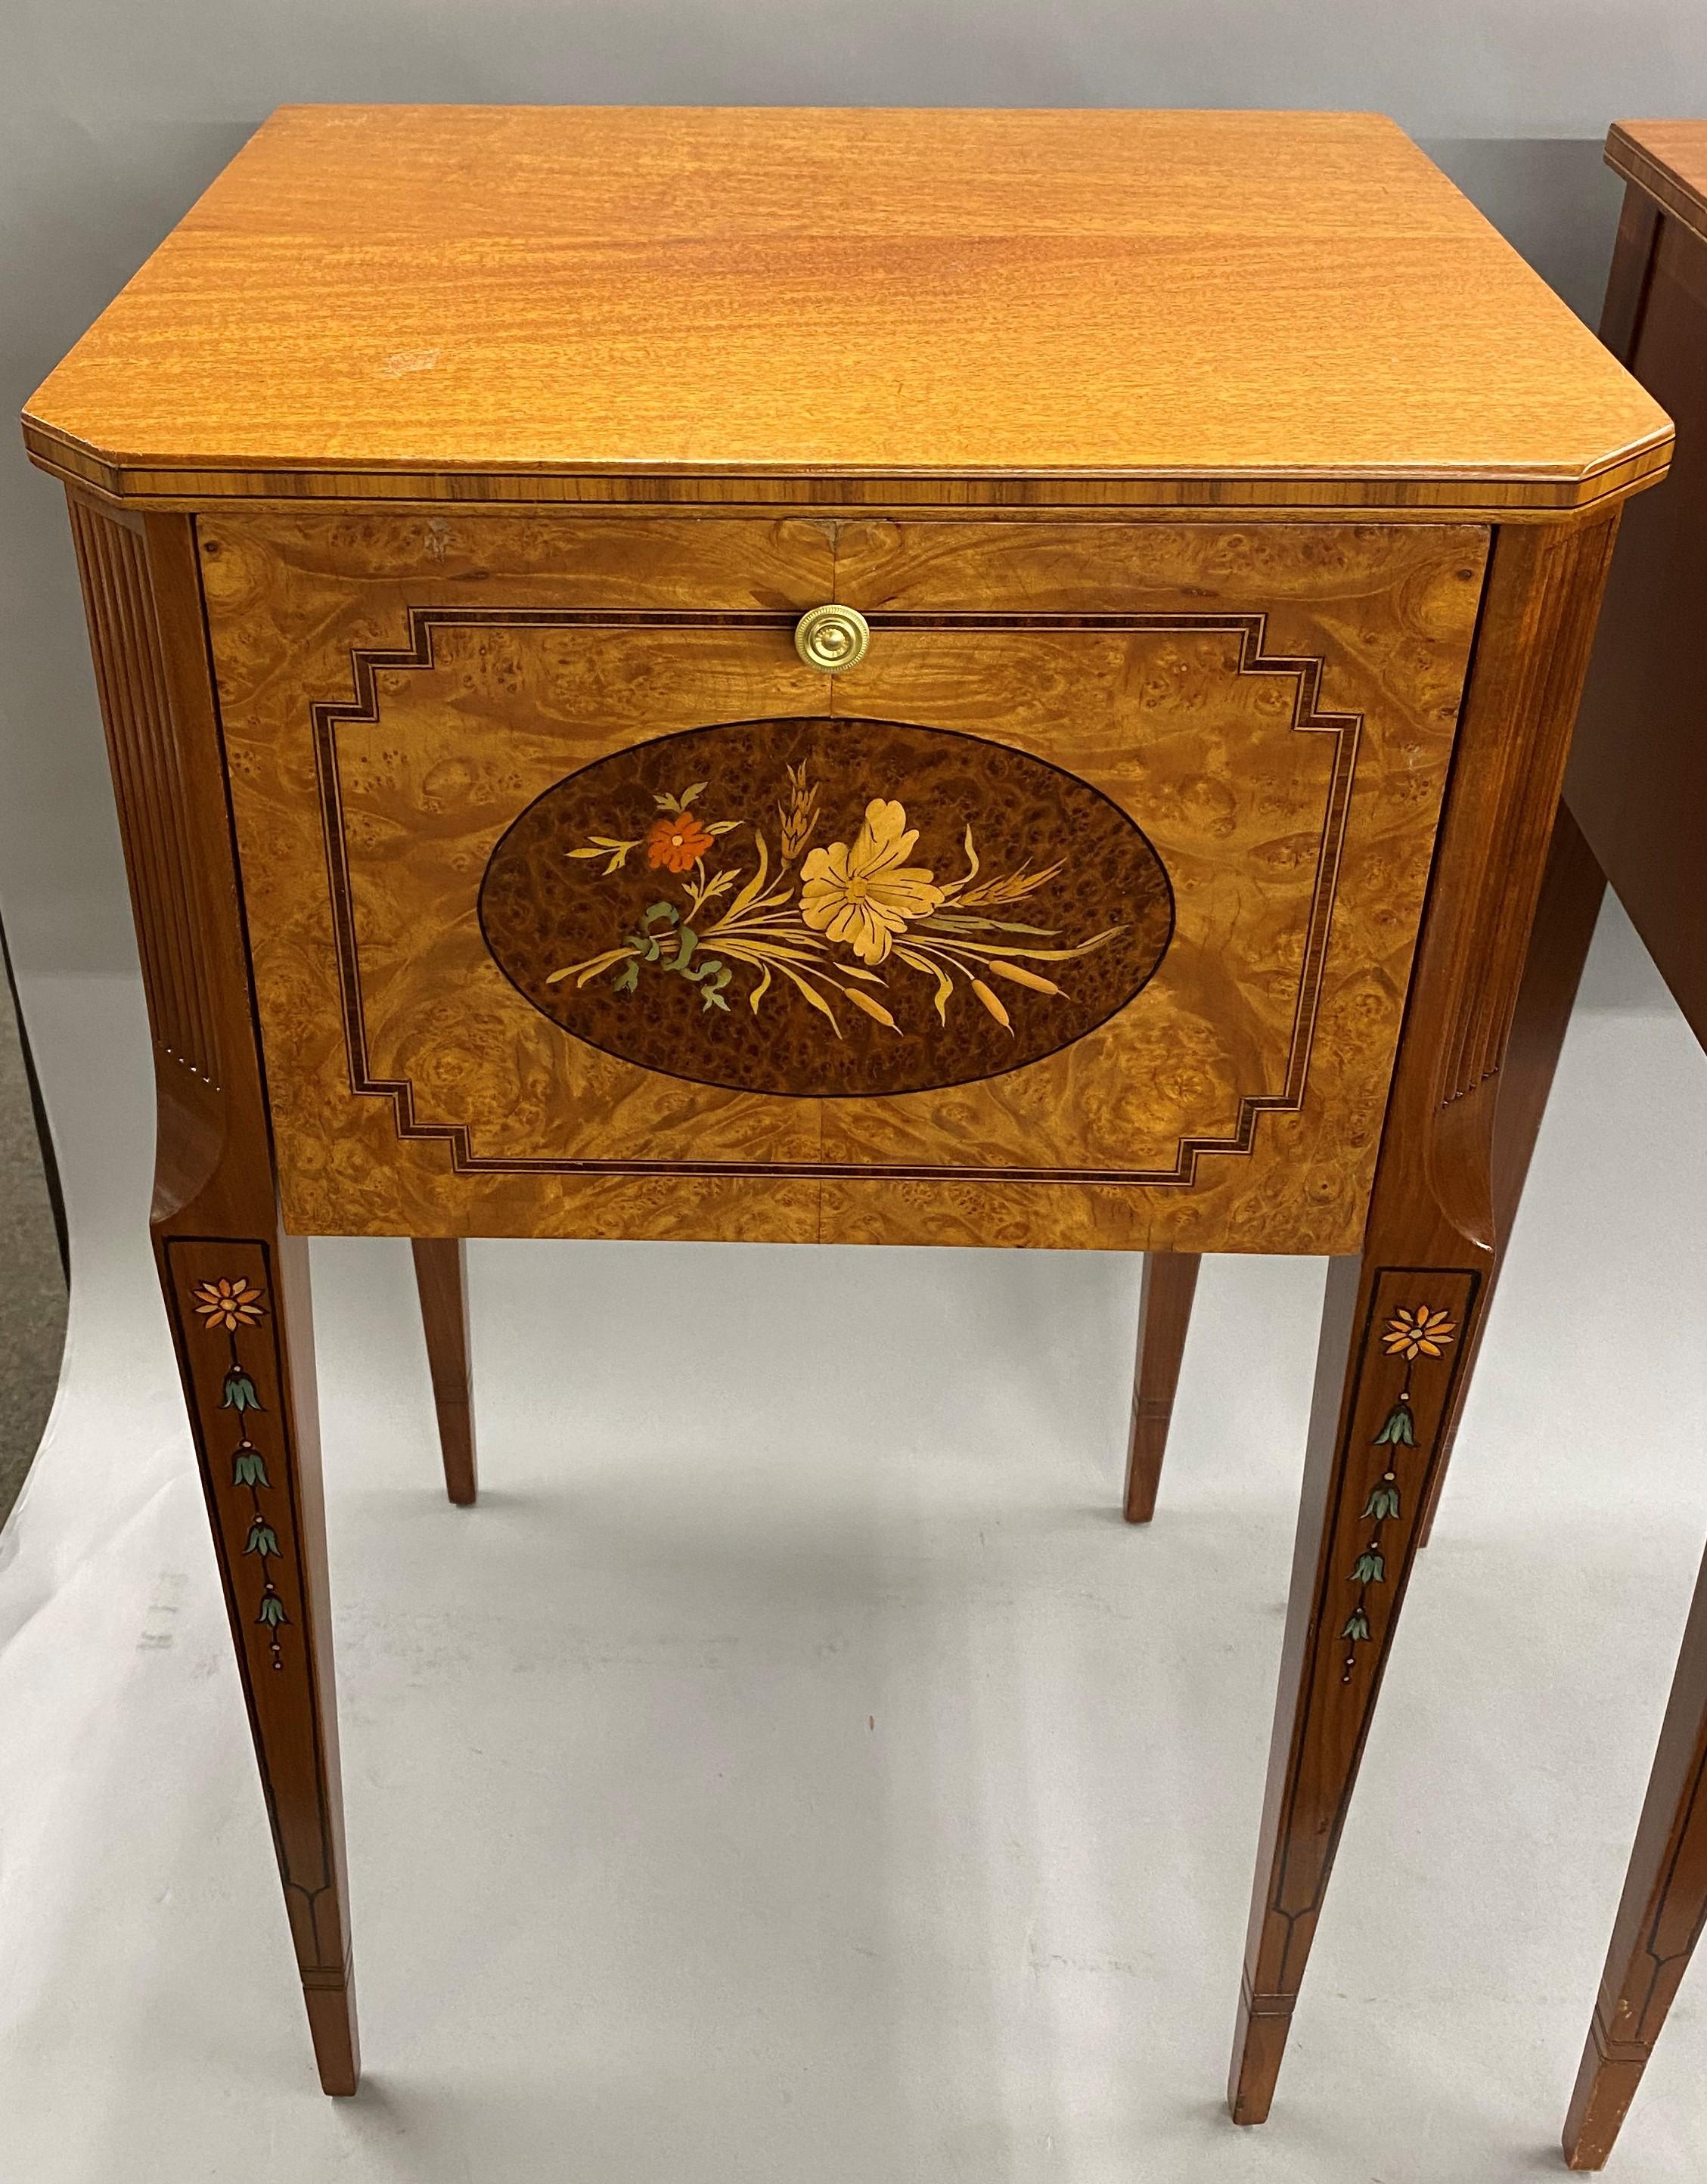 An eye catching pair of mahogany nightstands or end tables by Joseph Gerte, Boston, MA, with beautifully inlaid foliate panels featuring various woods on the hinged drop fronts, and canted reeded corners, supported by tapered paint decorated square